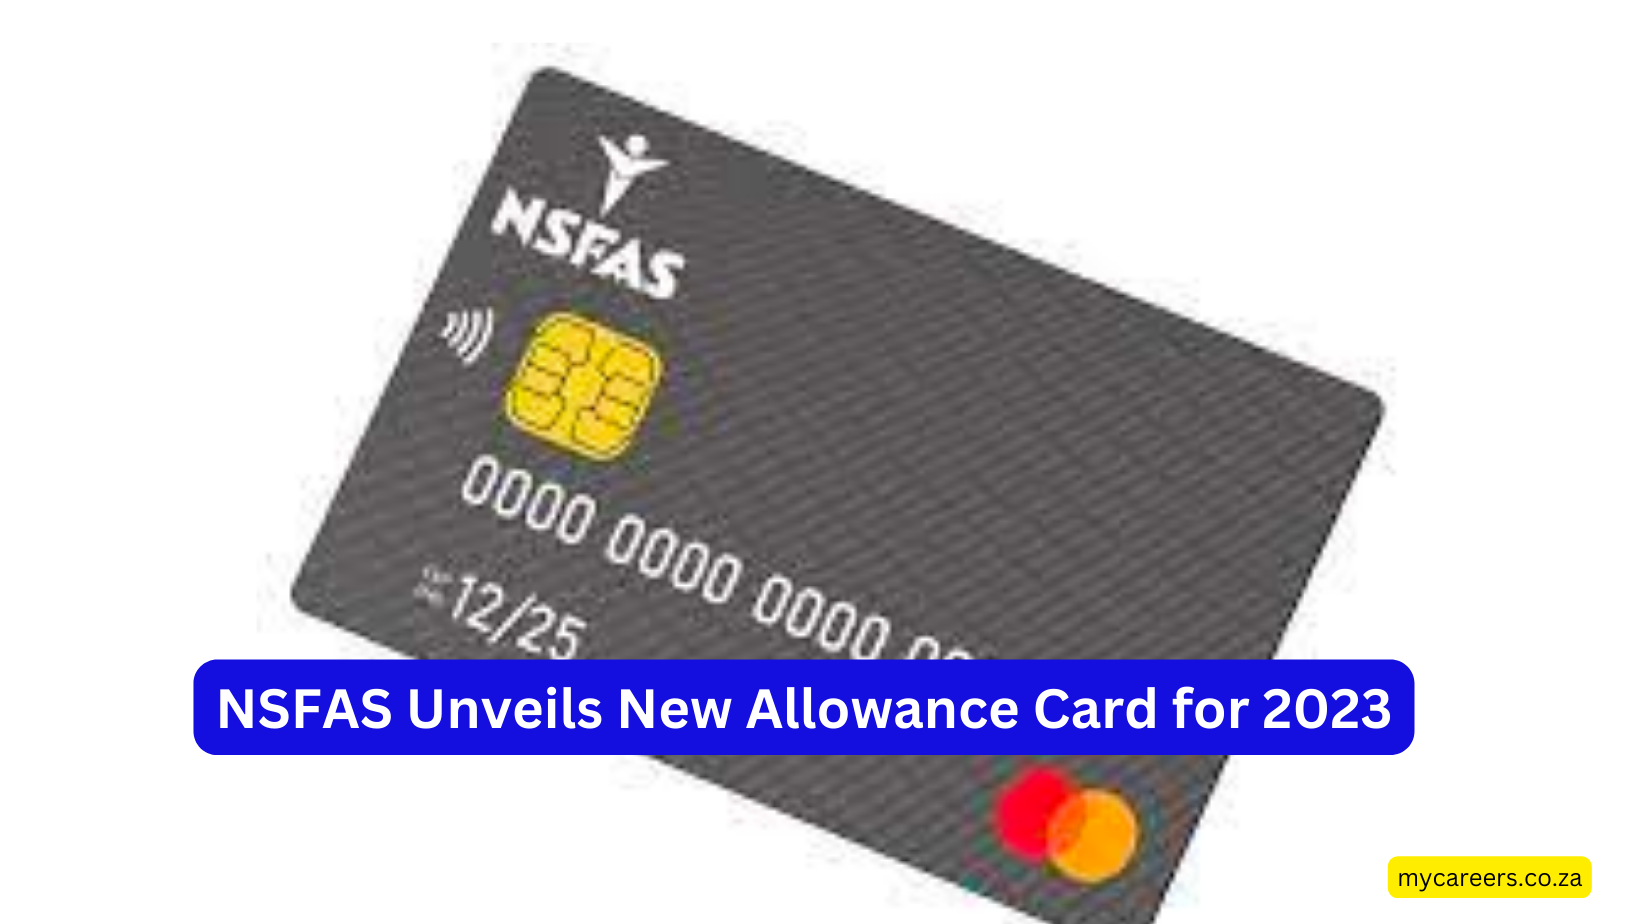 NSFAS Unveils New Allowance Card for 2023